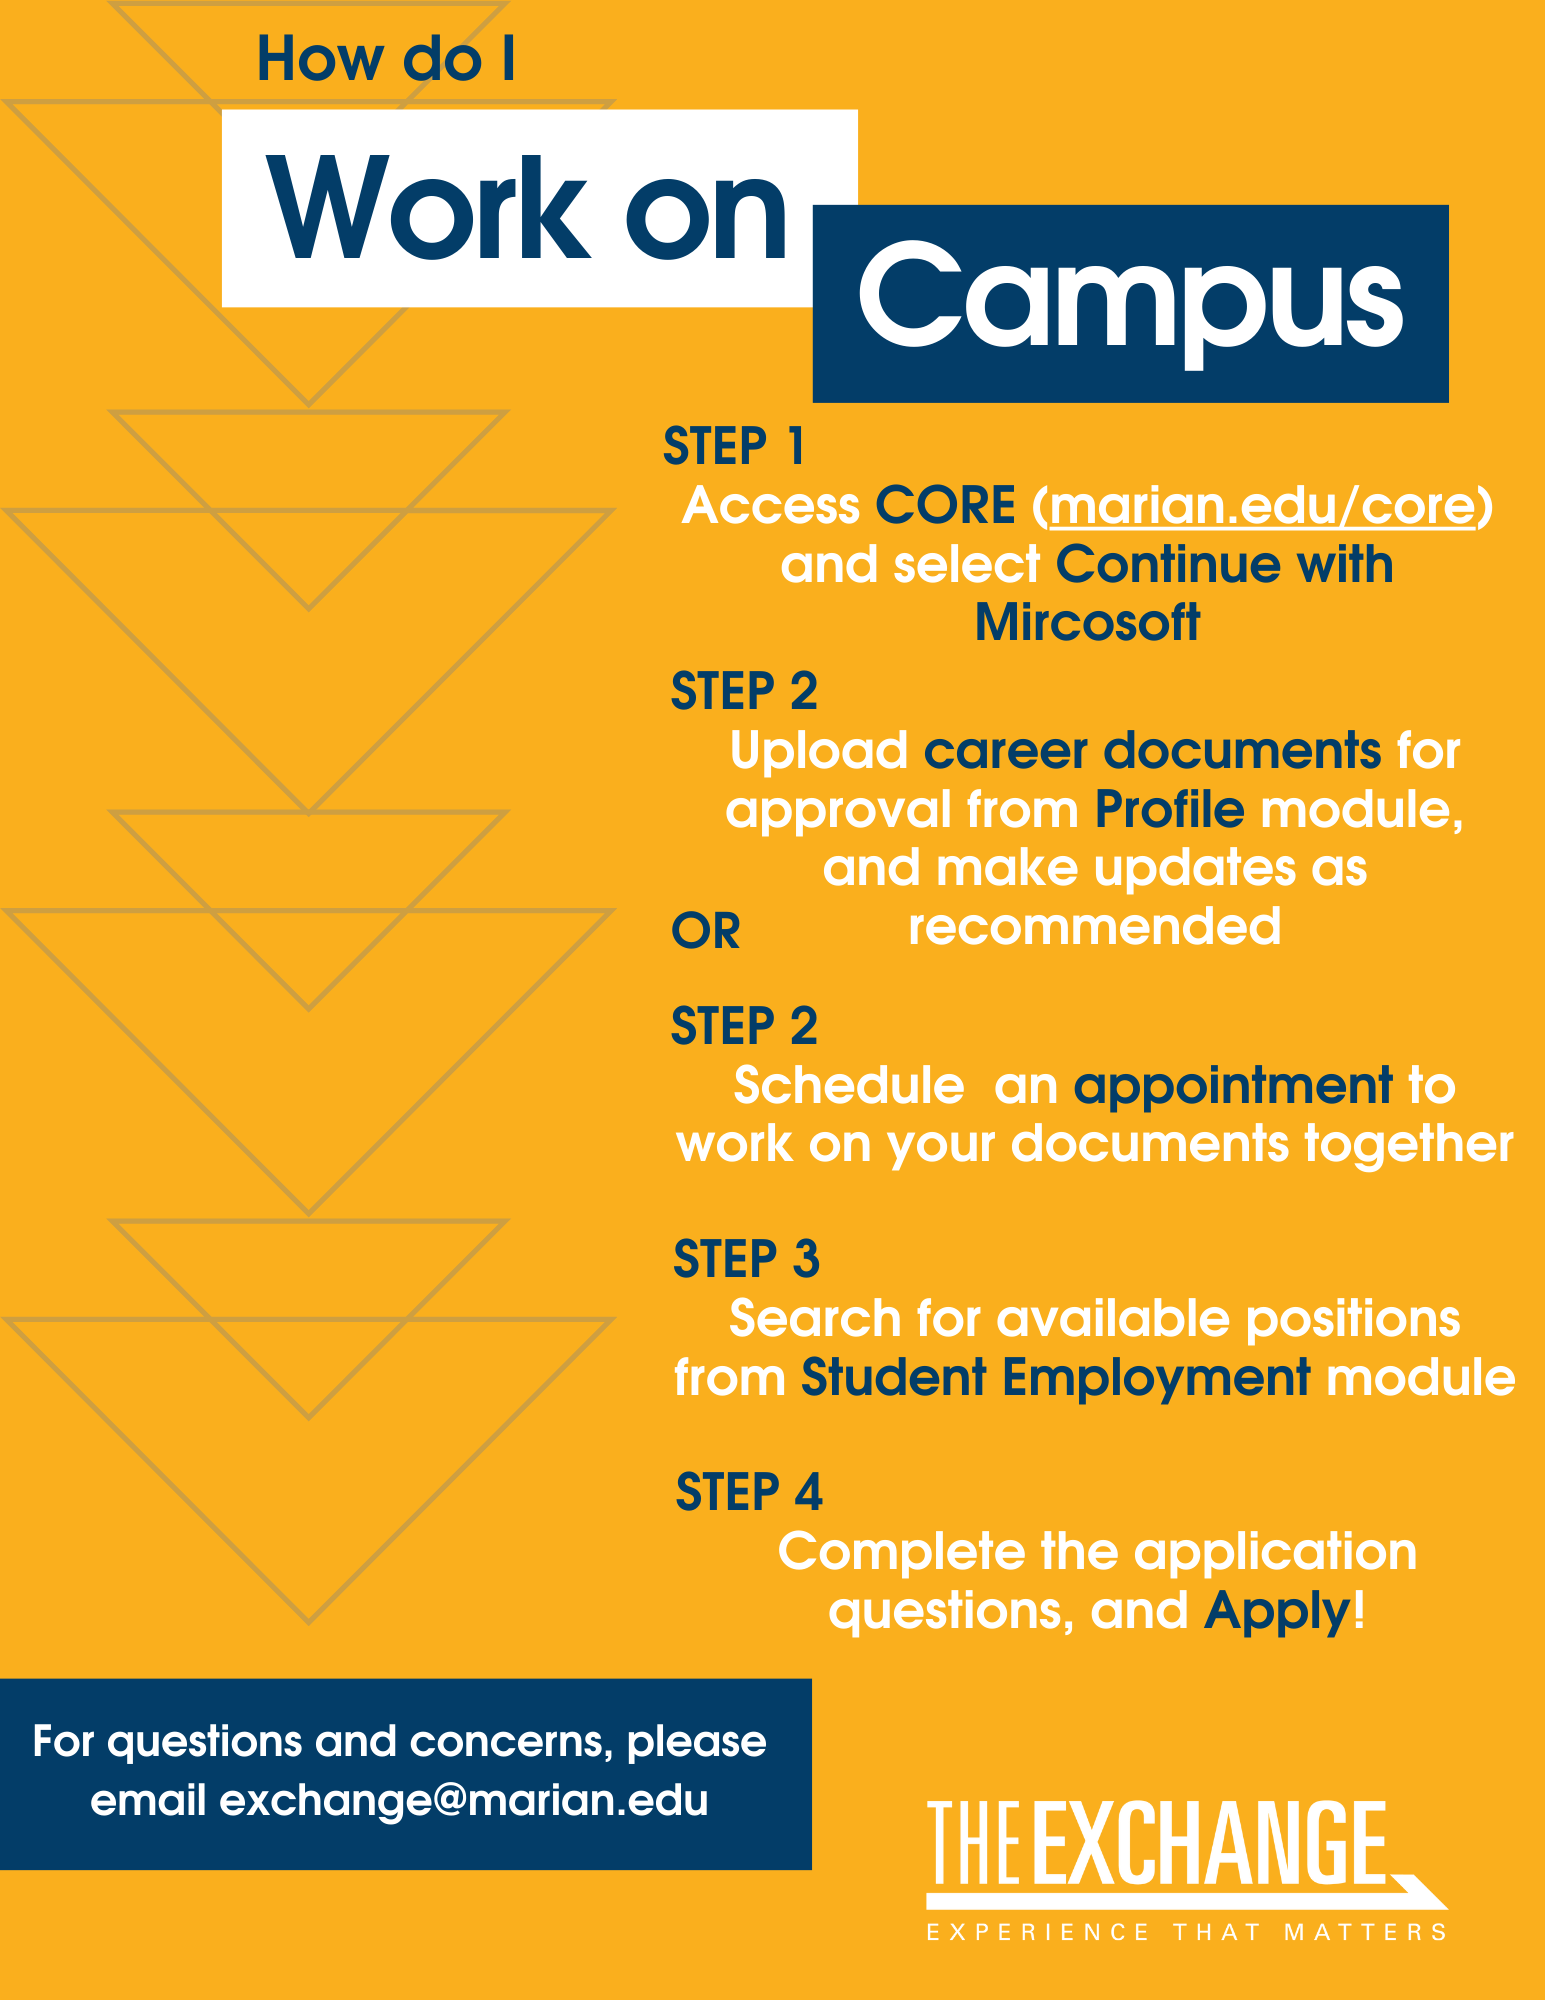 How do I Work on Campus